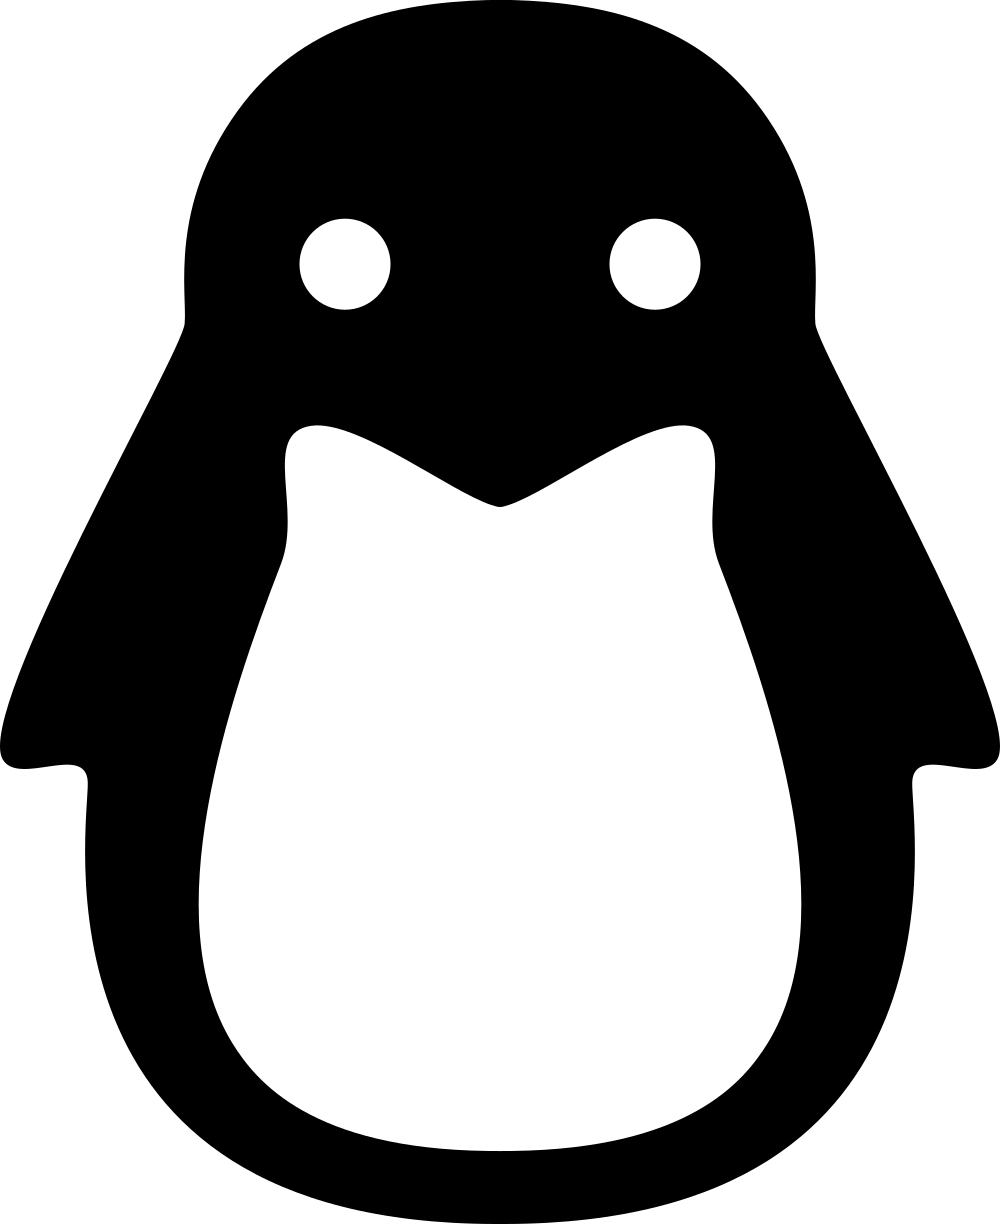 The Other linux logo